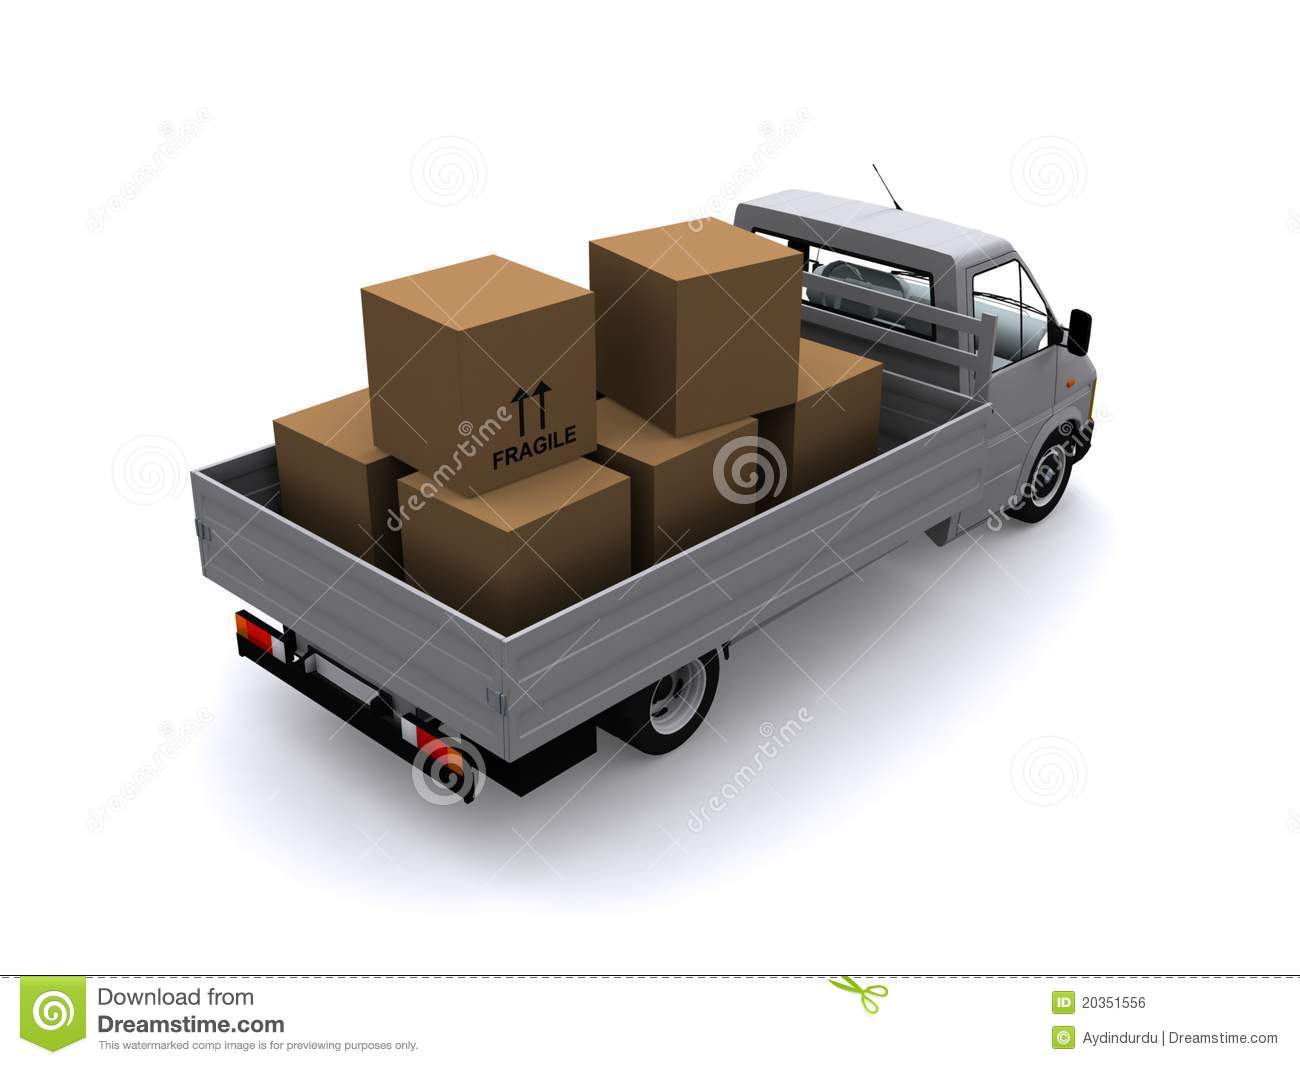 Loaded Flatbed Truck Royalty Free Stock Image   Image  20351556